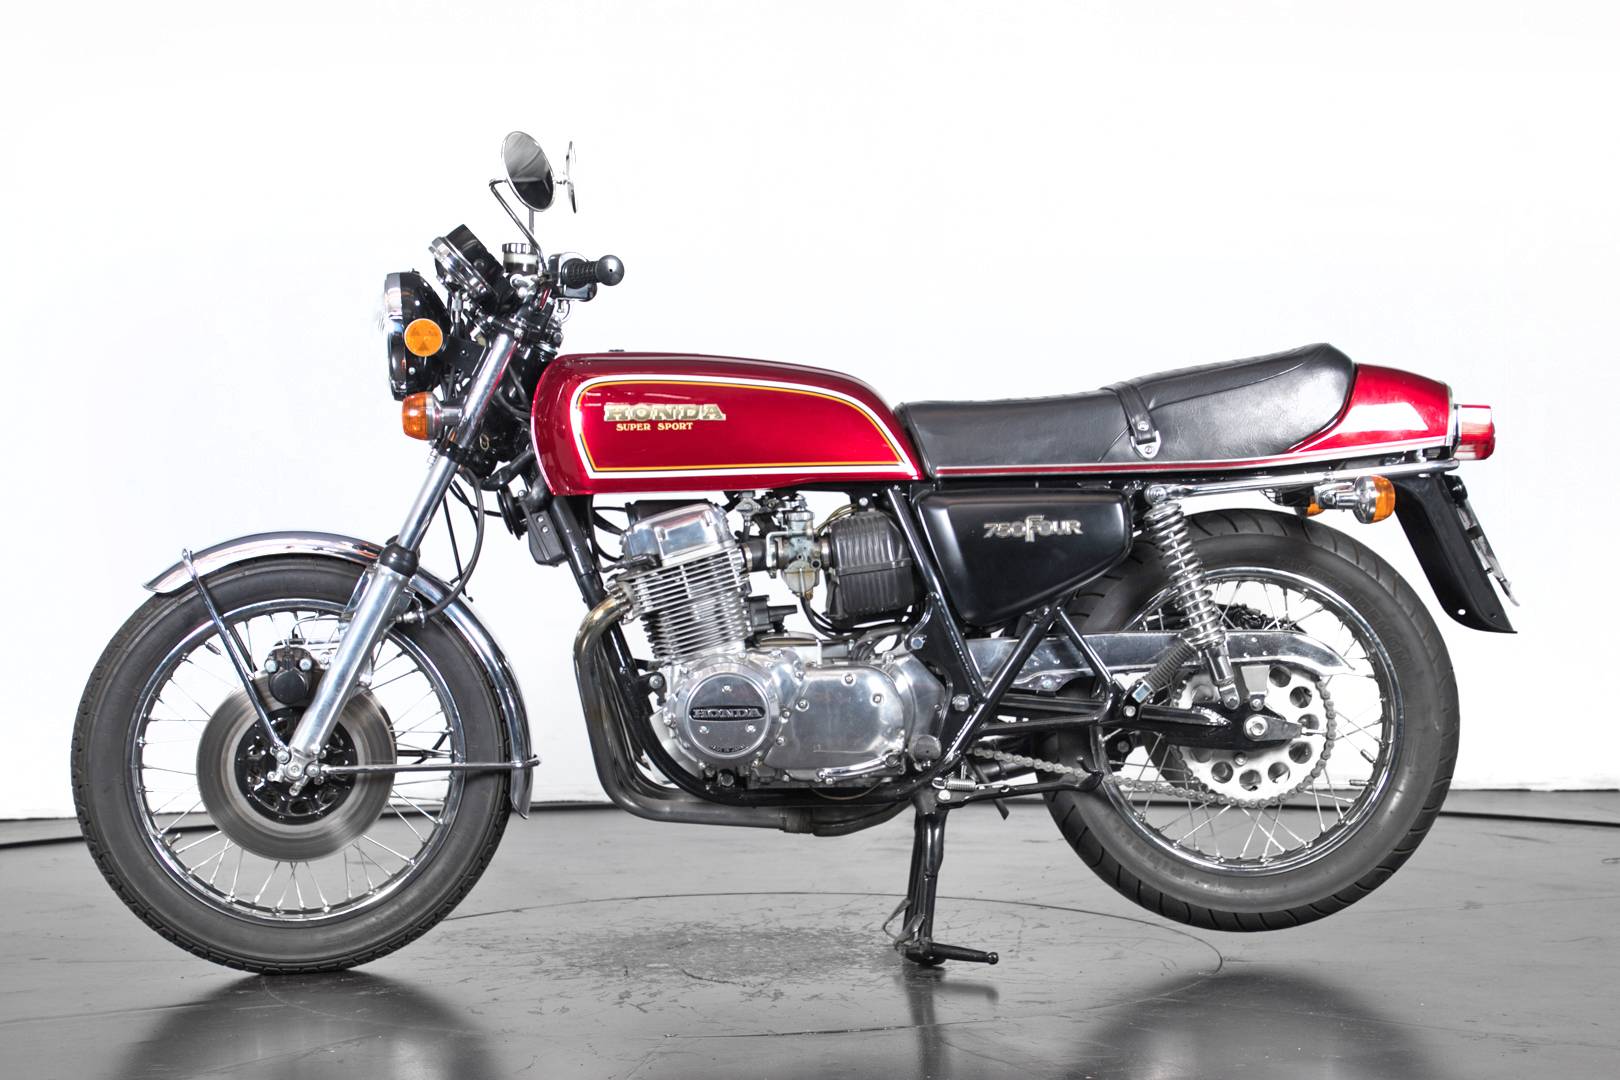 For Sale Honda CB 750 Four (1976) offered for GBP 5,095